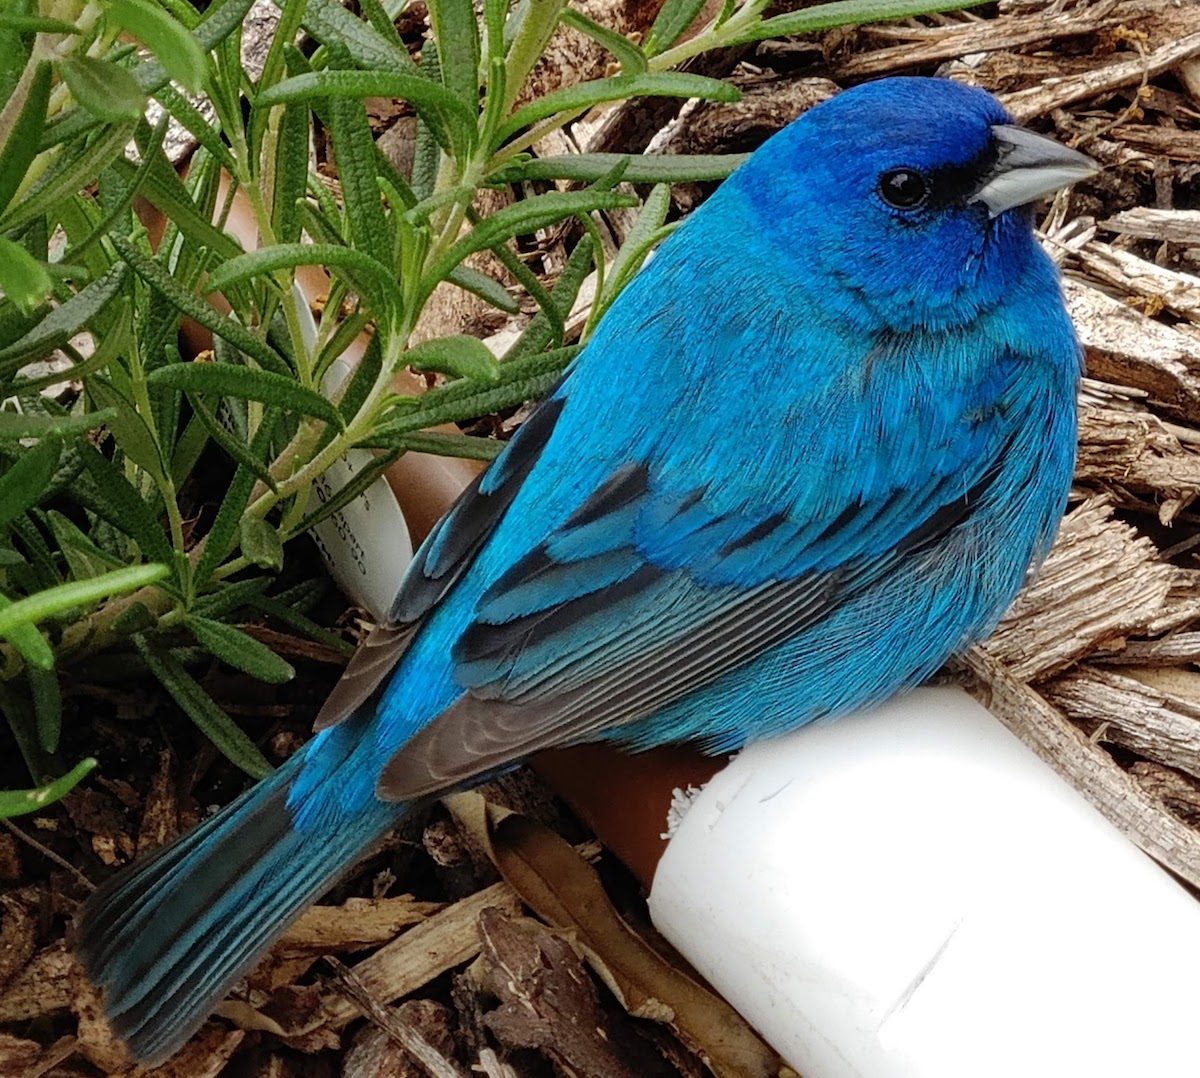 20 Inspiring Pictures of Indigo Buntings - Birds and Blooms